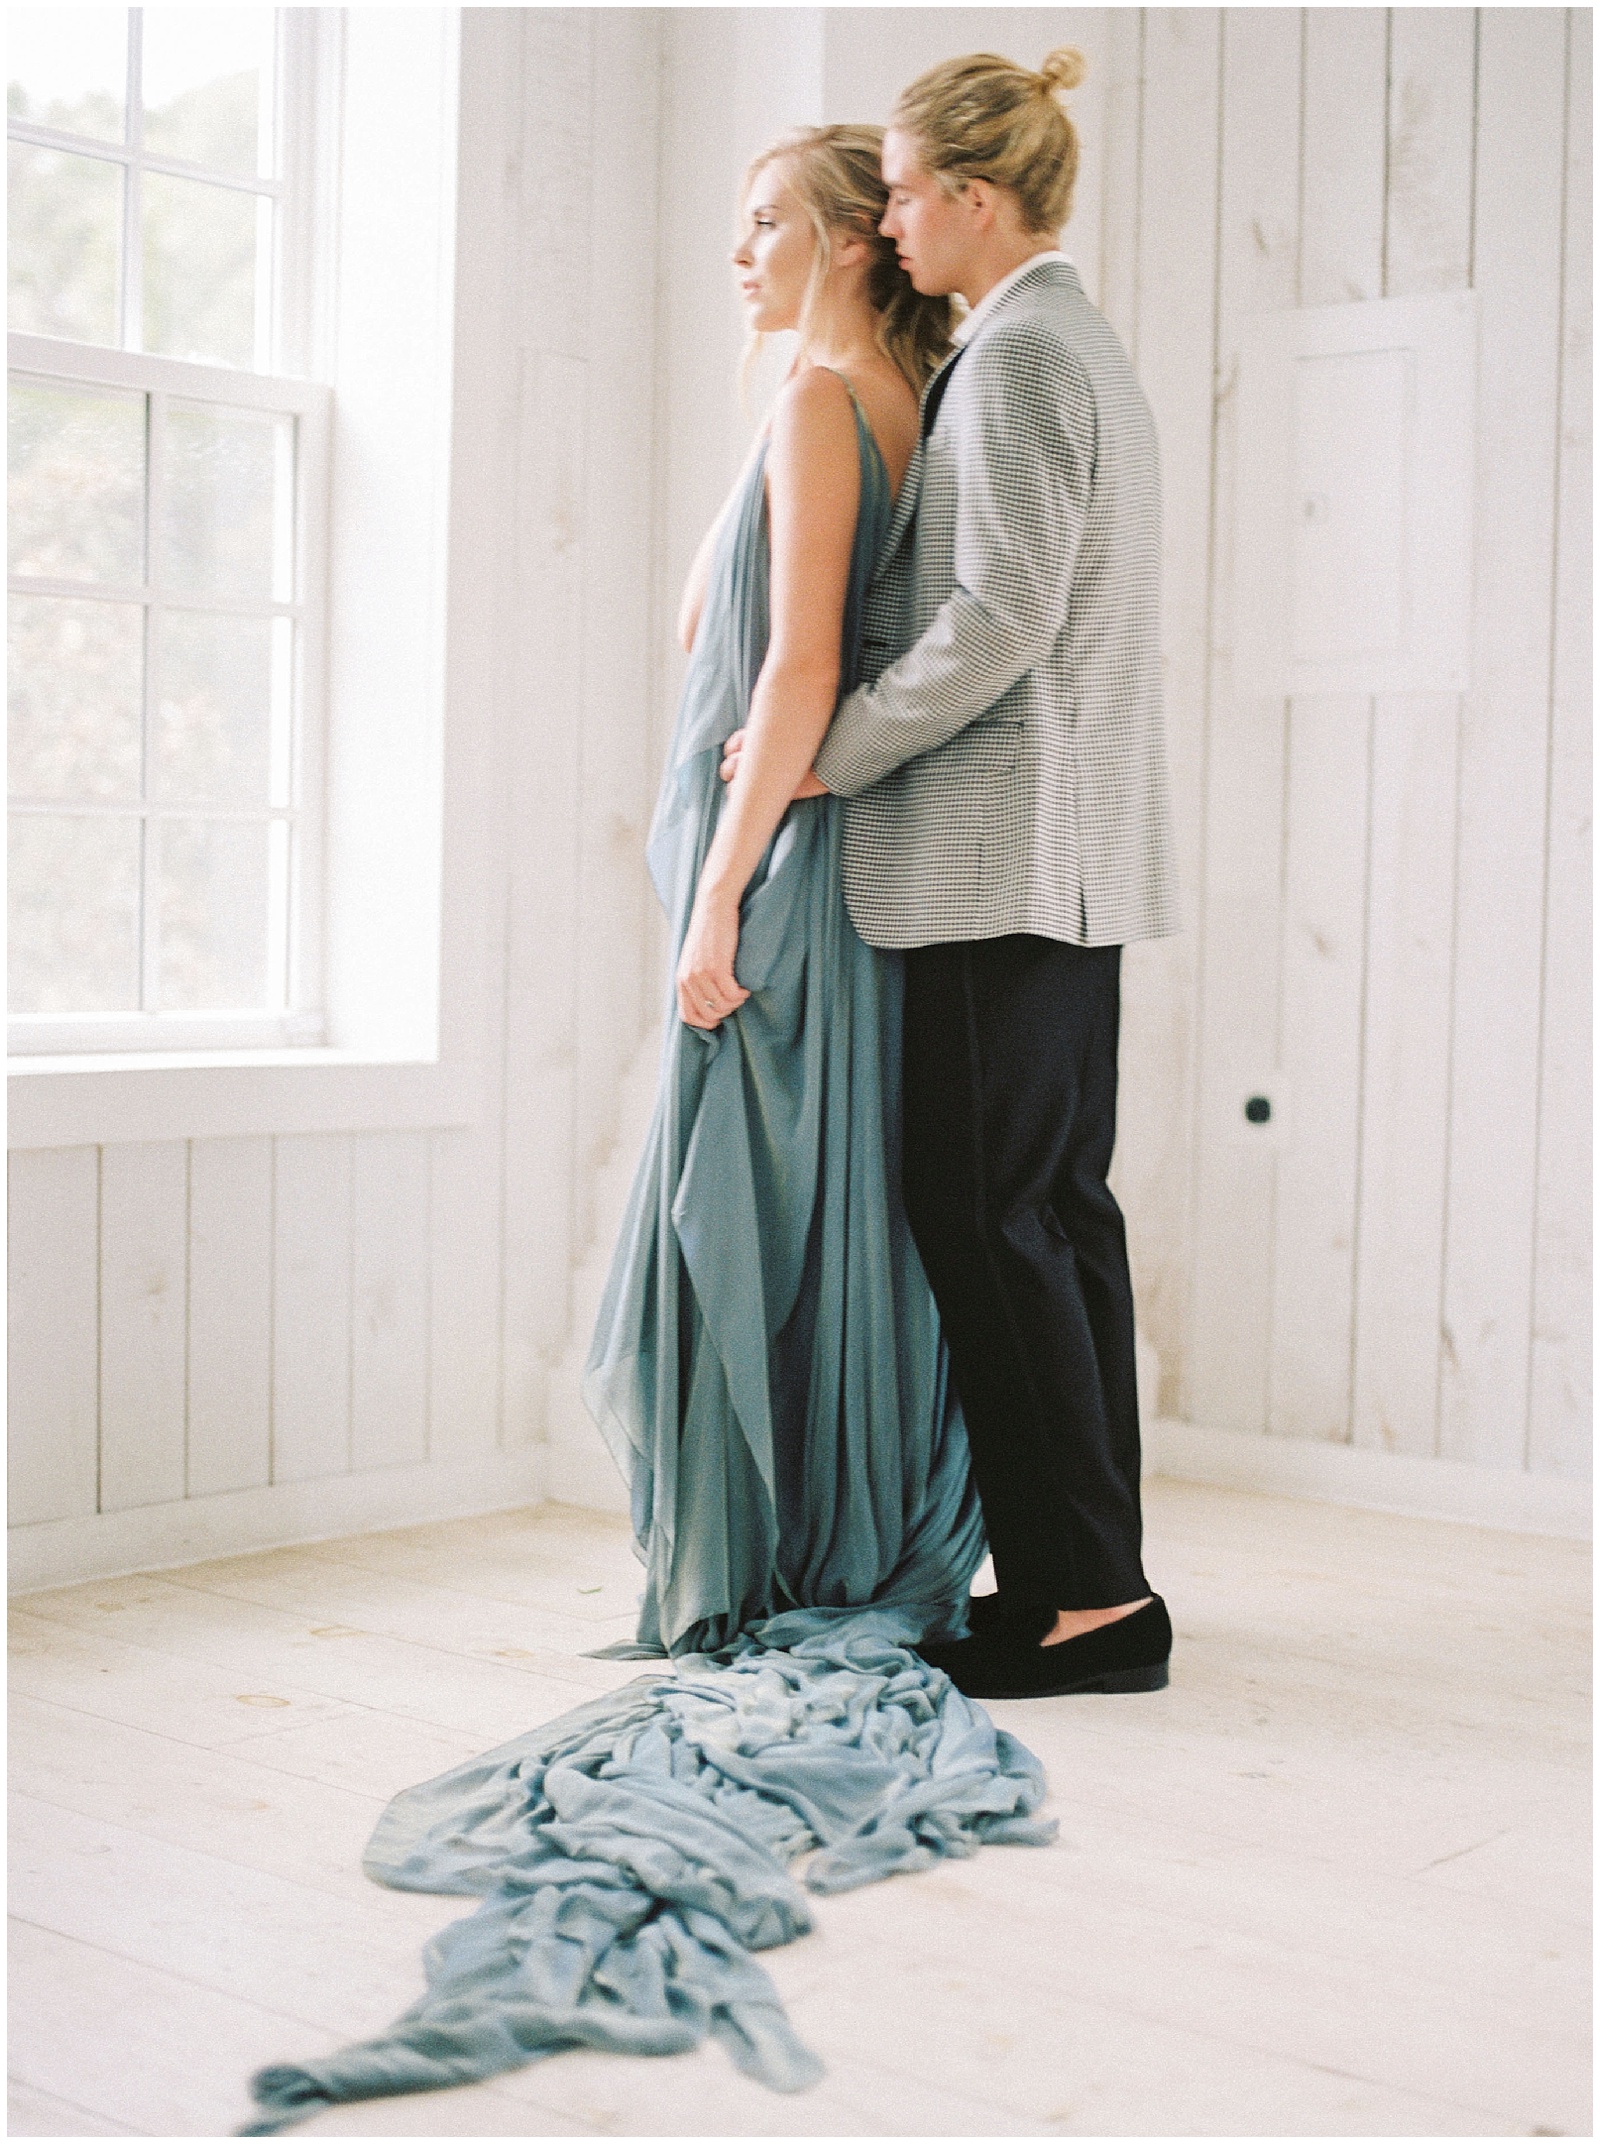 White Sparrow barn engagement session